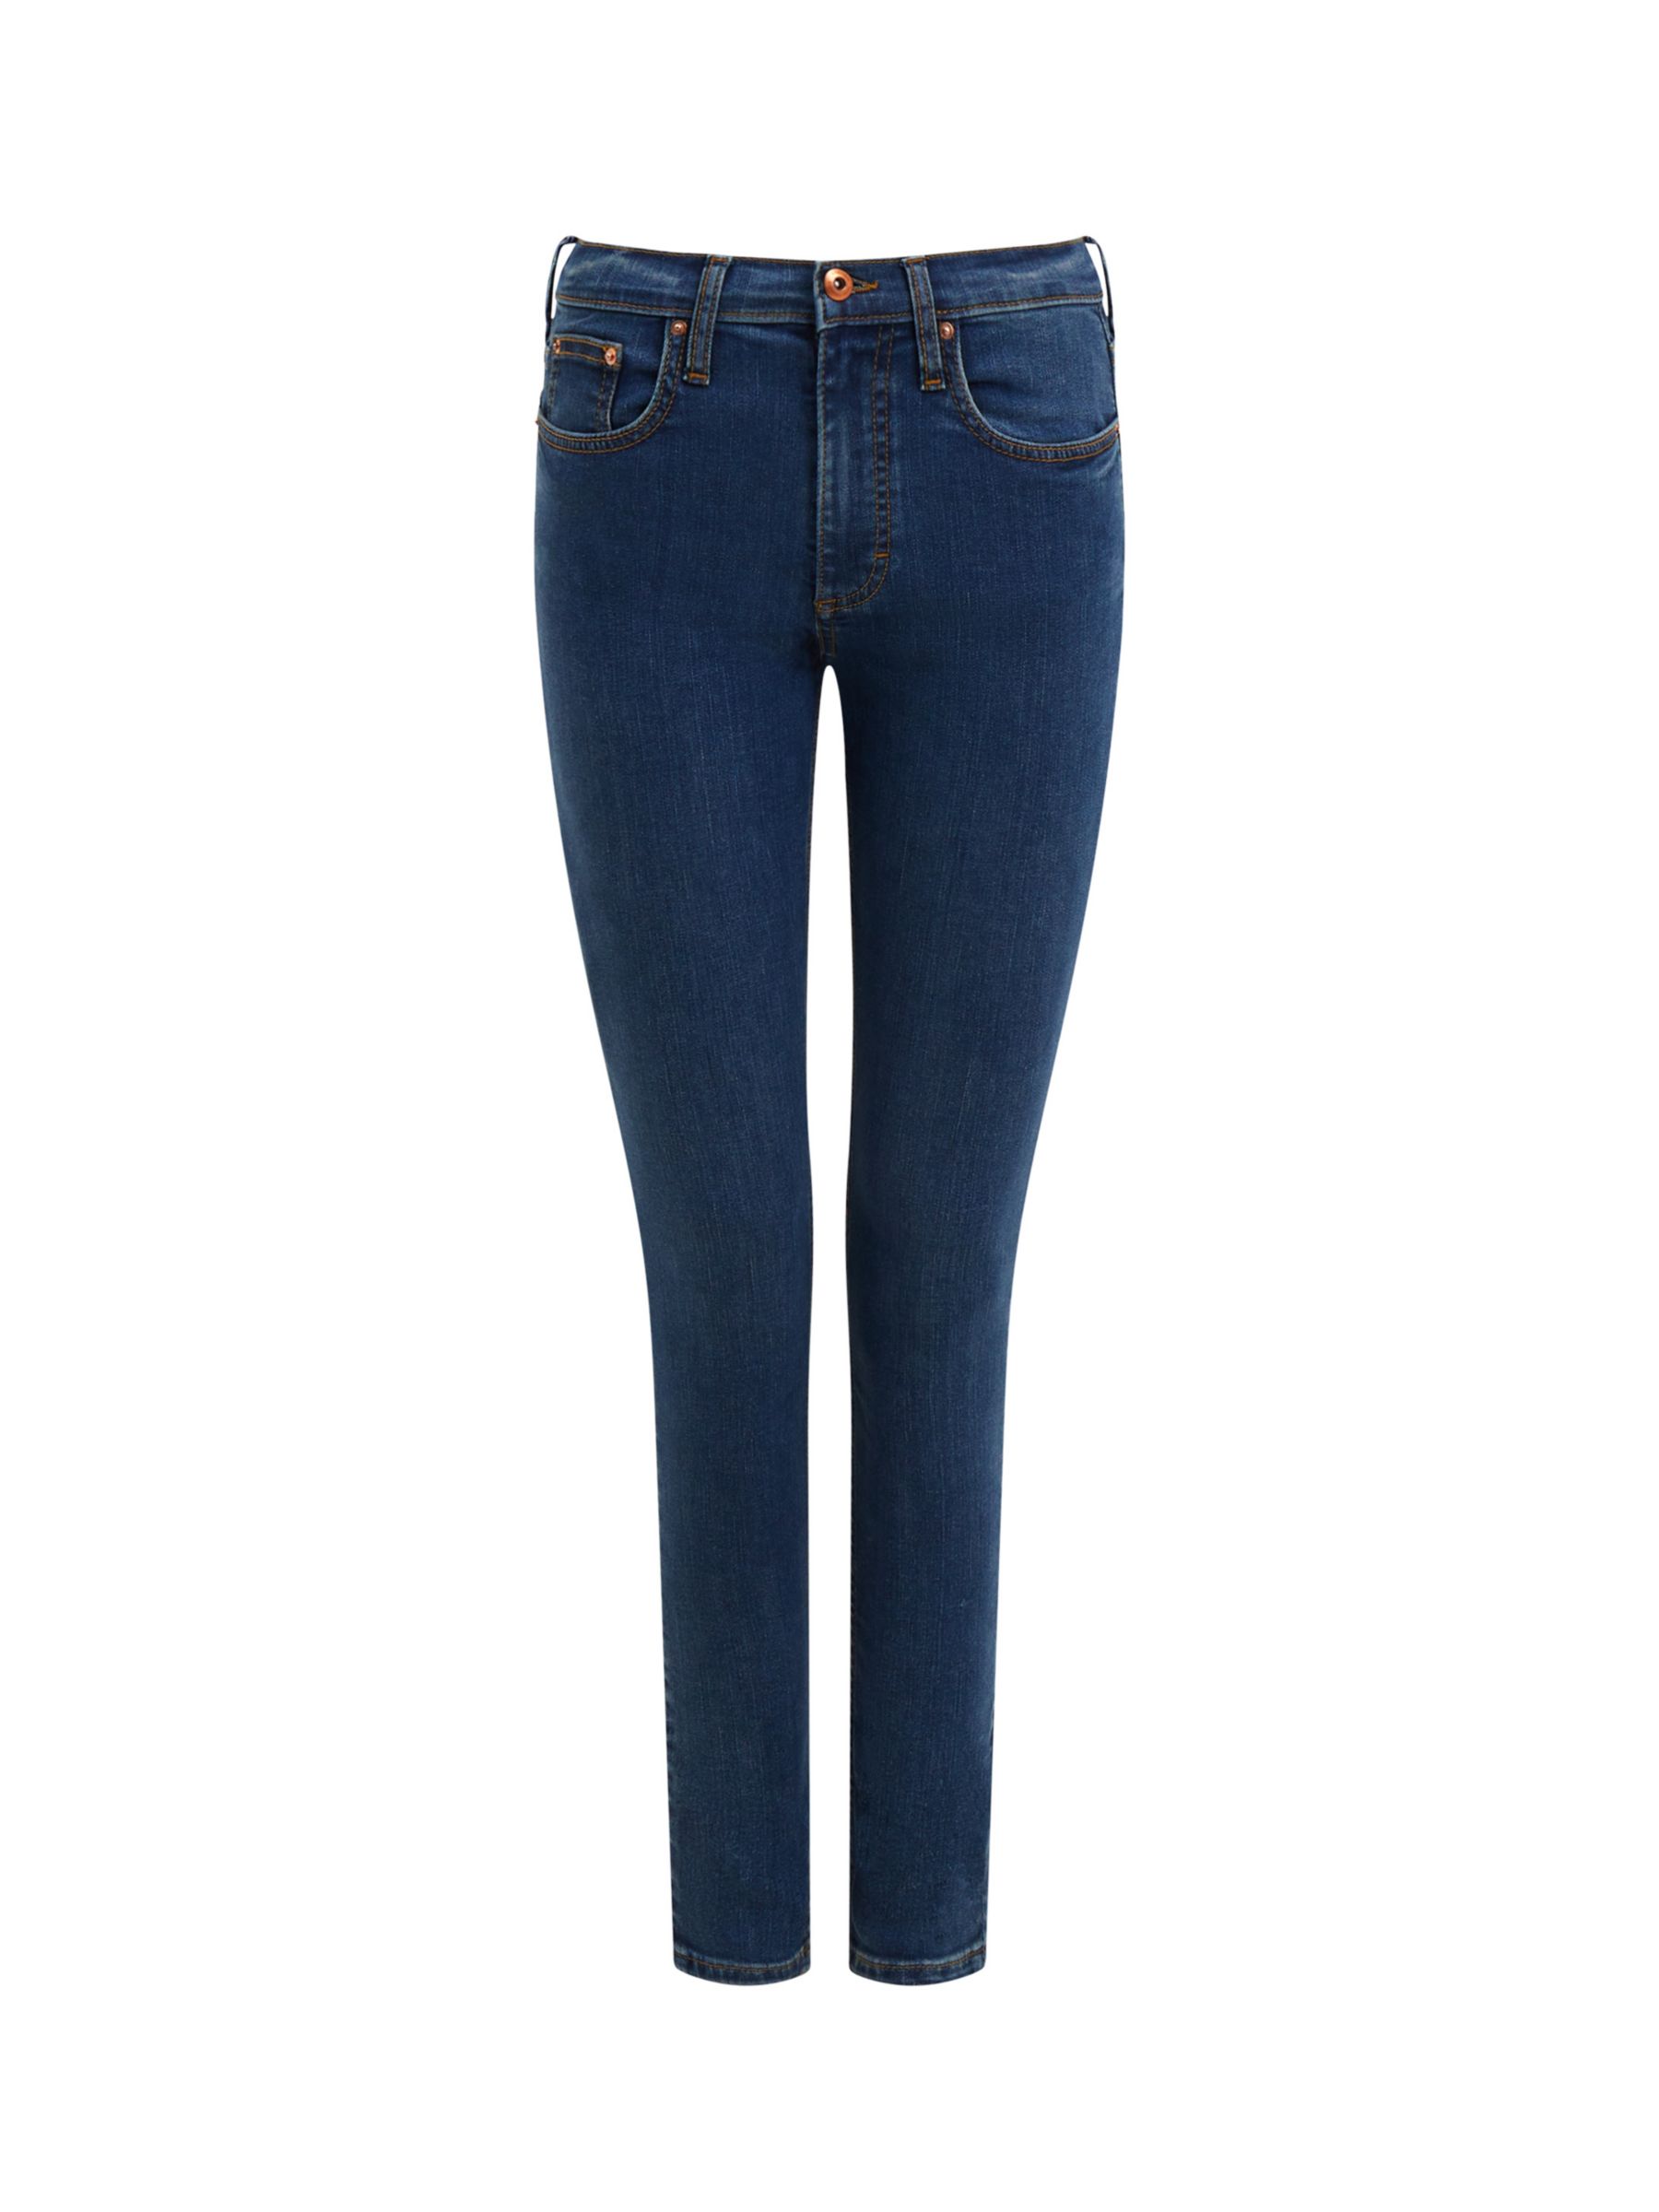 Buy French Connection Rebound Response Skinny Jeans, Vintage Online at johnlewis.com